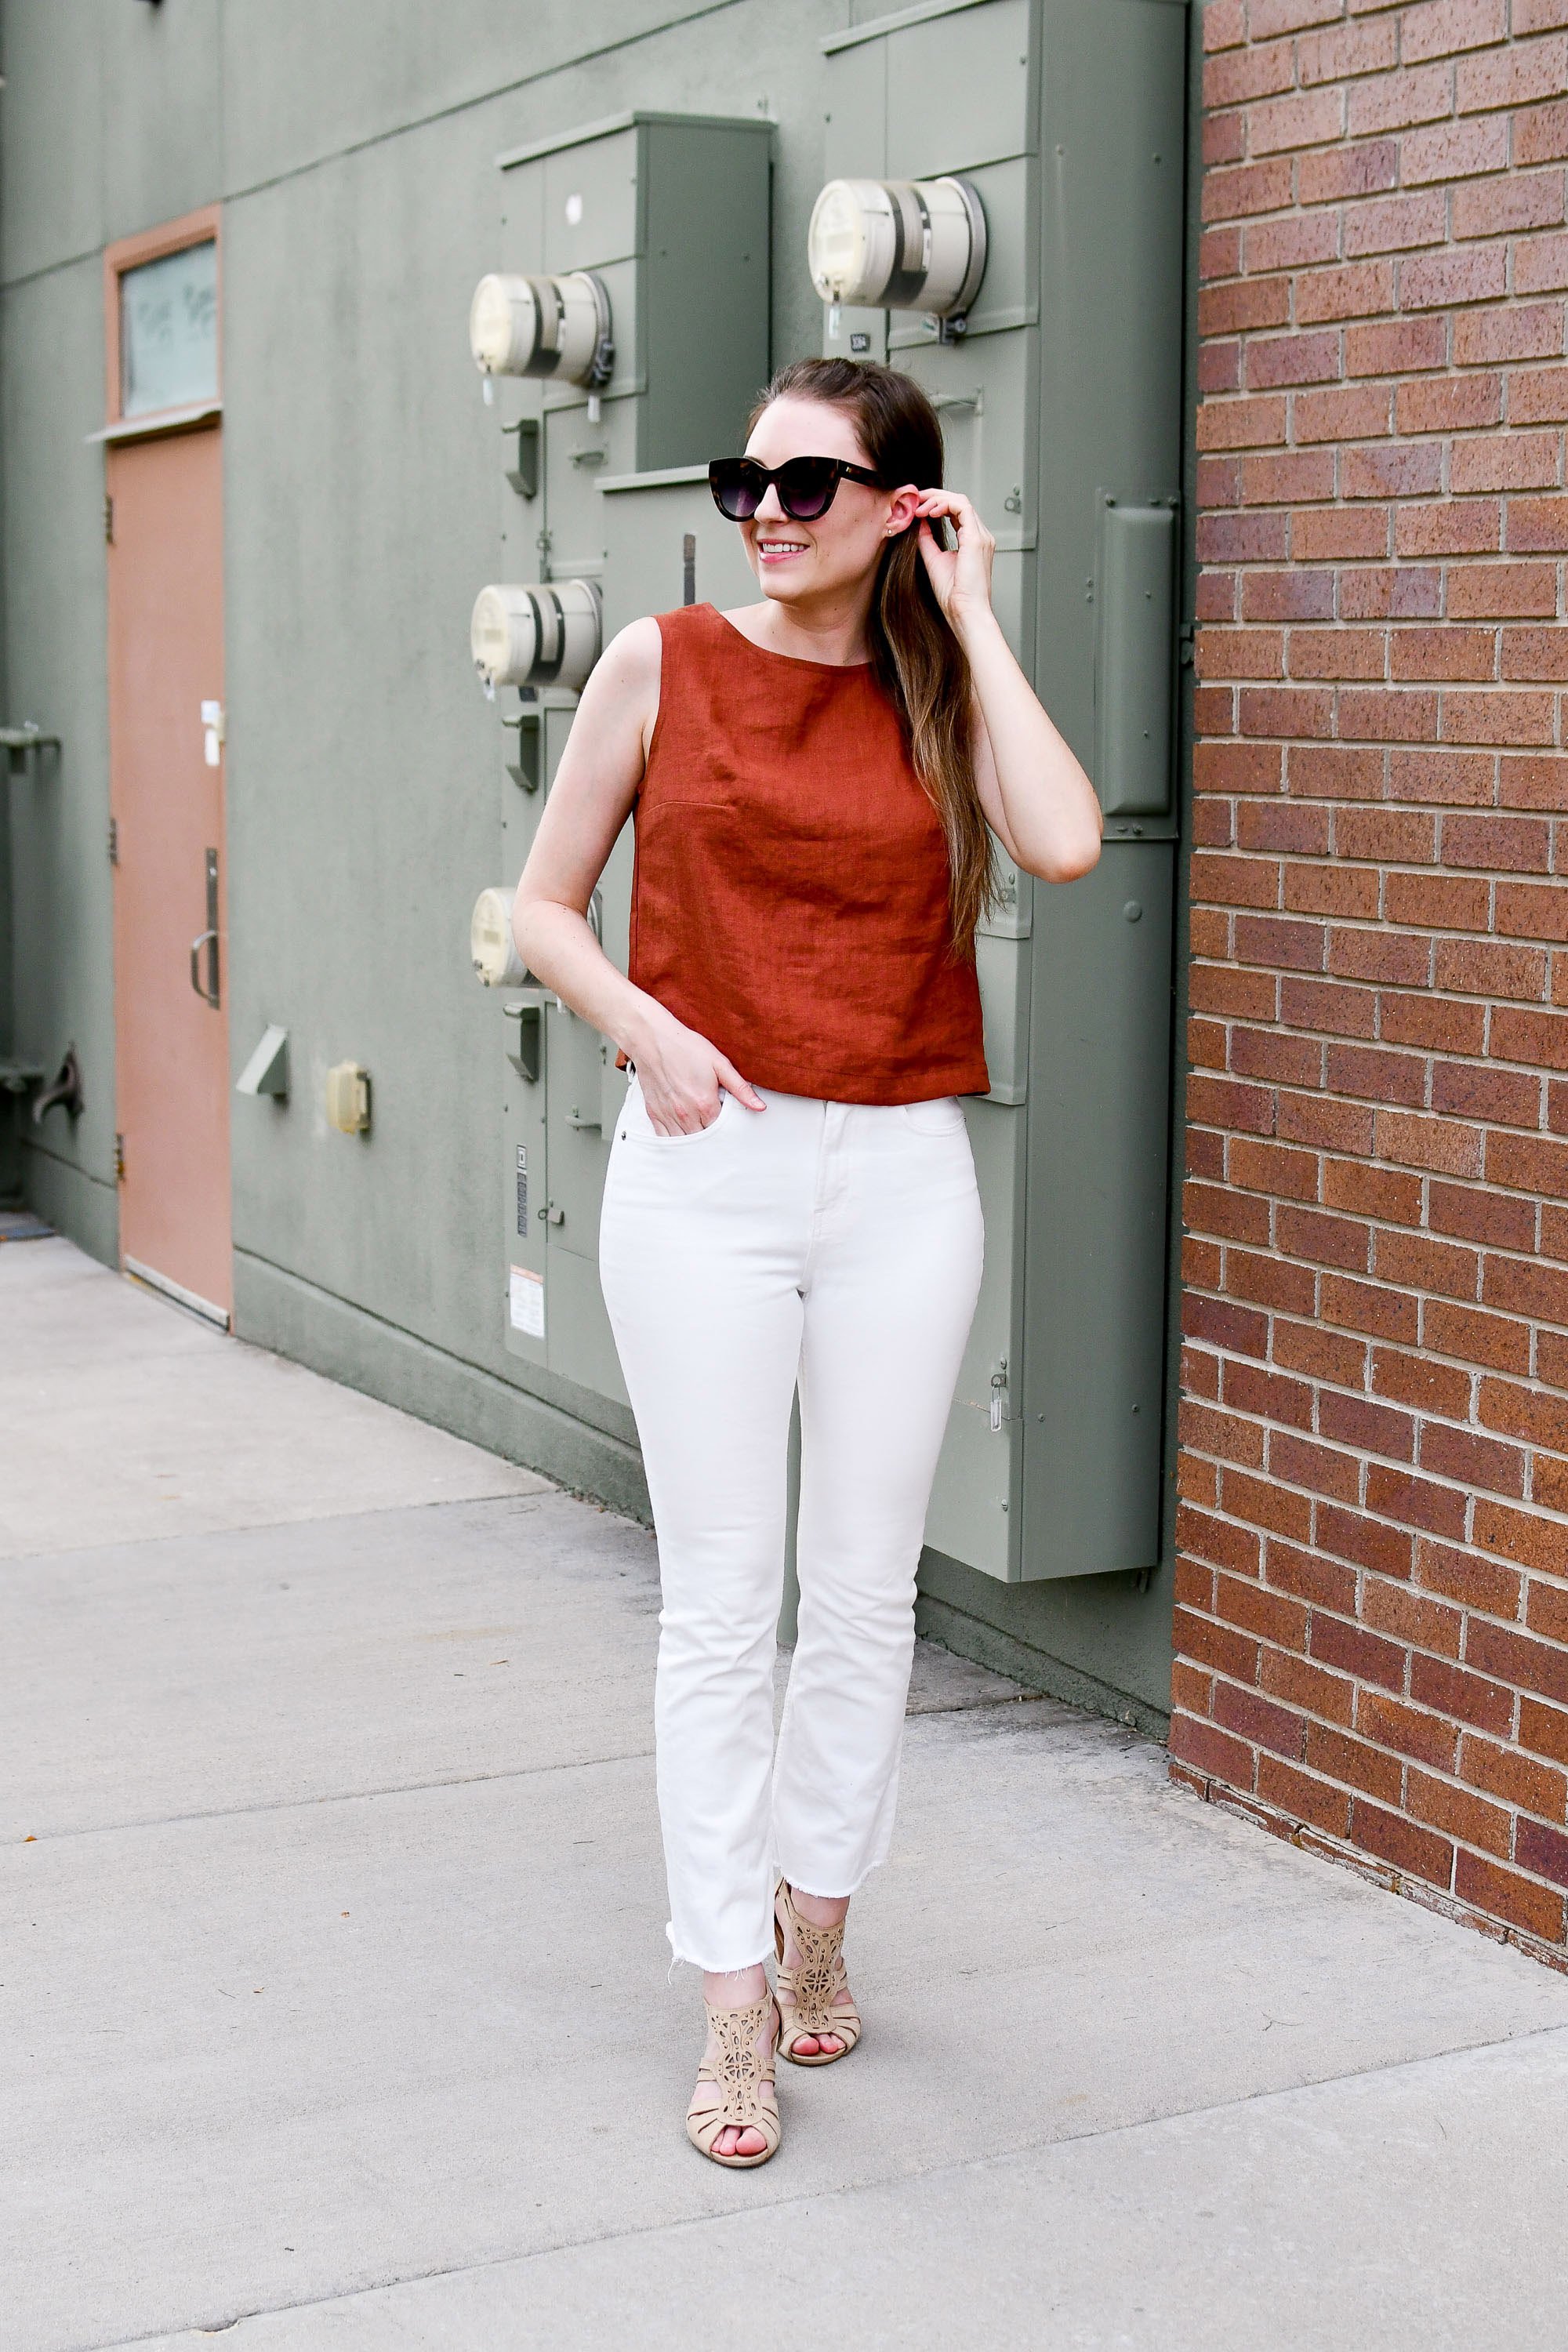 How to Dress Smart Casual in the Summer (+ 16 Outfit Ideas!)